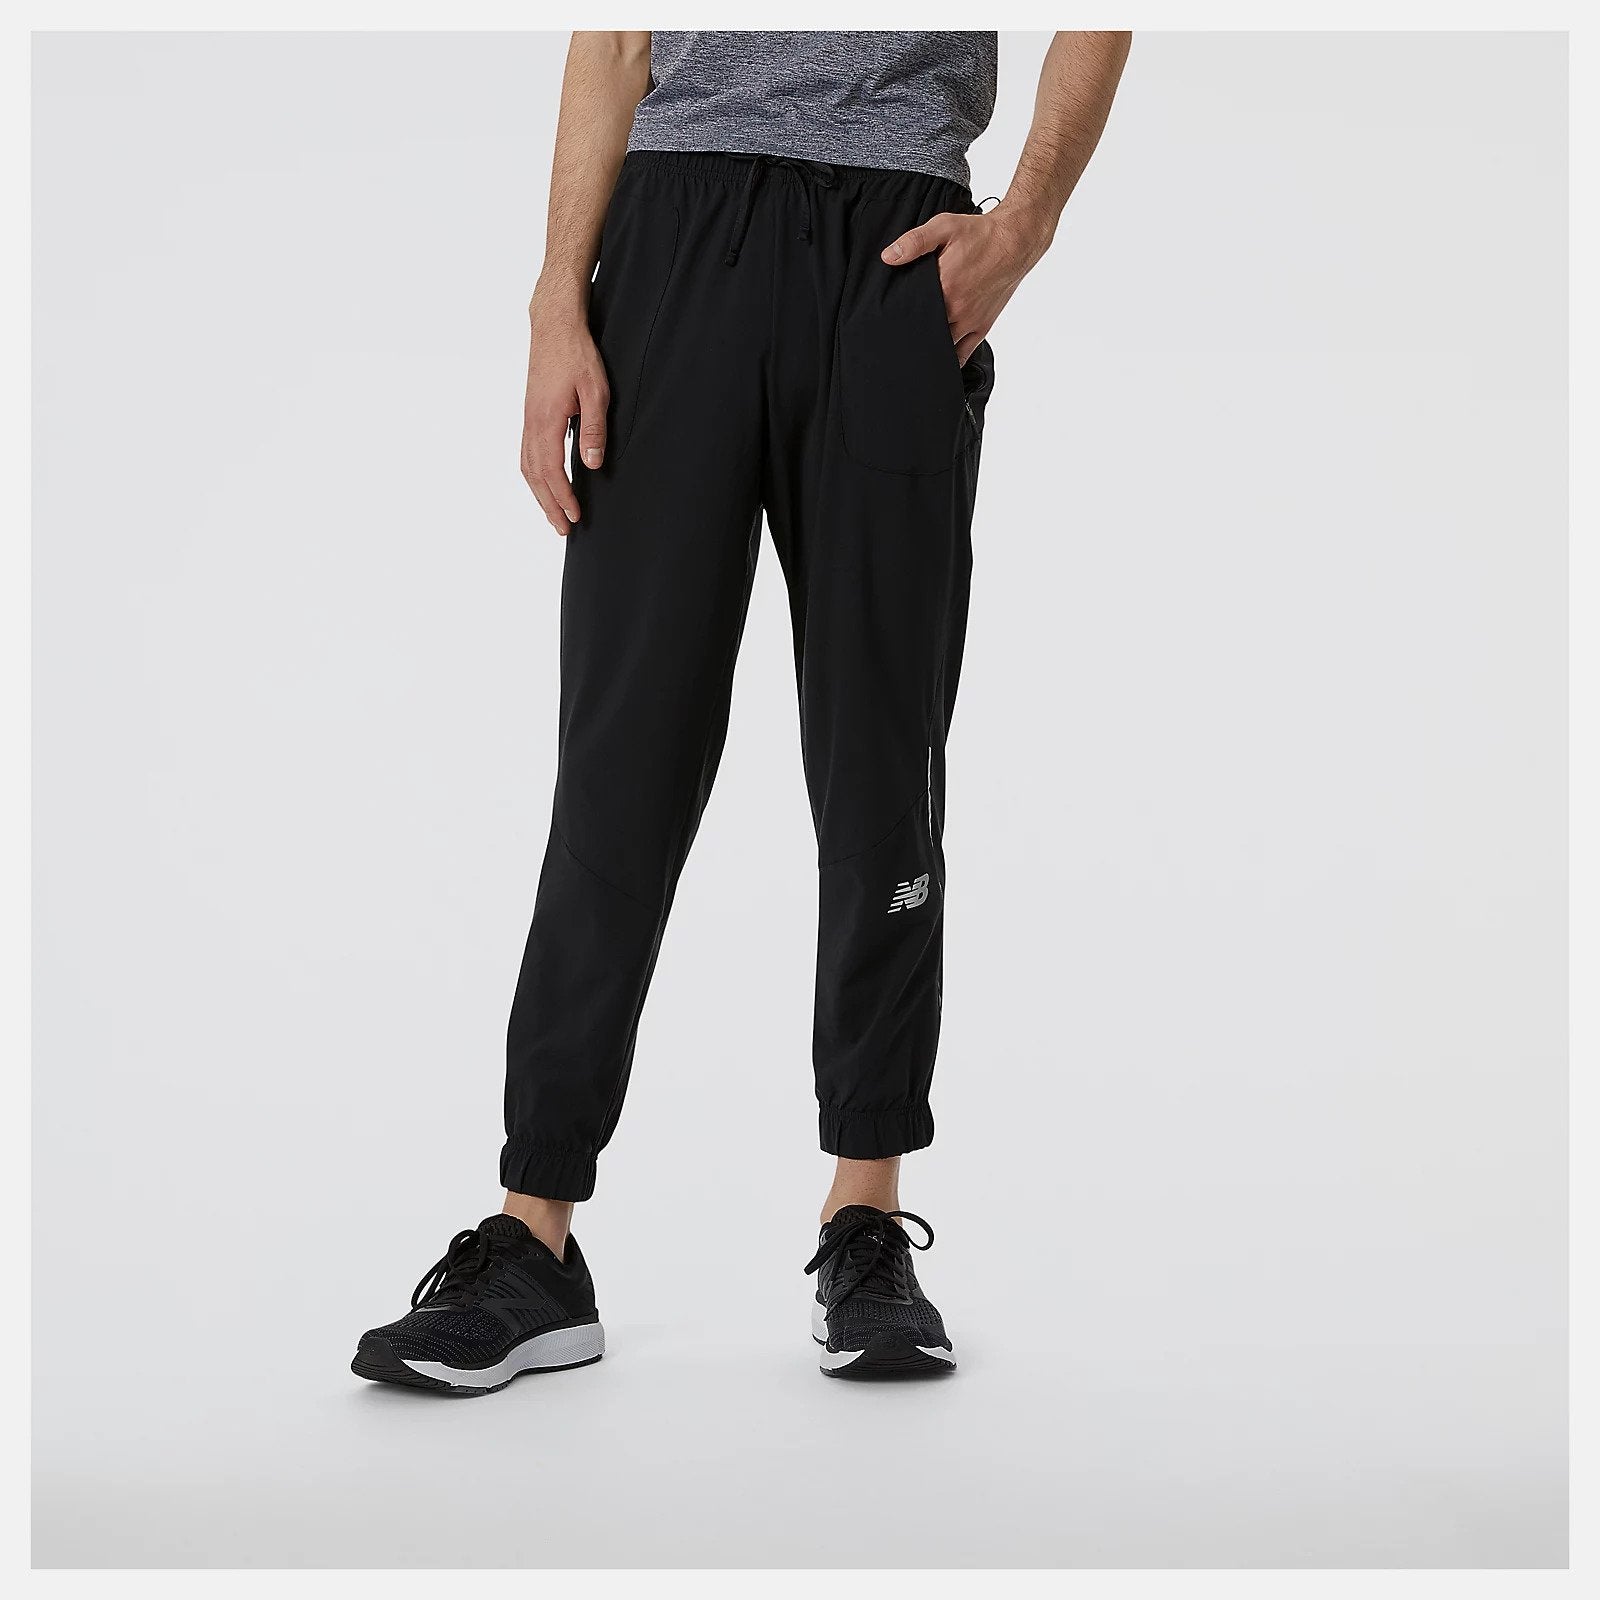 Front view of the Men's Impact Run Woven Pant by New Balance in Black